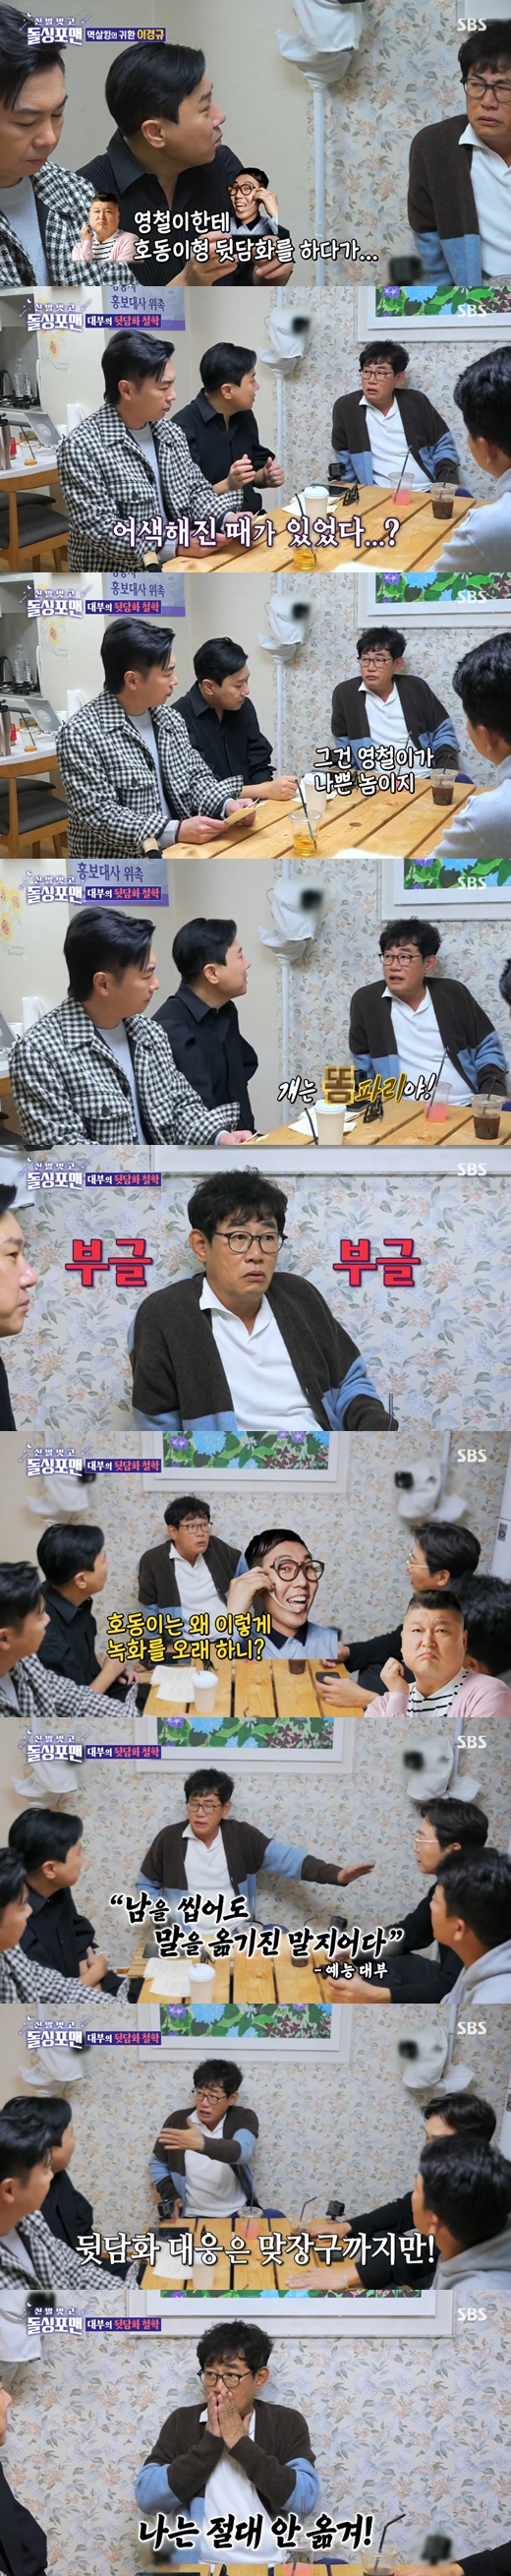 Comedian Lee Kyung-kyu has told the story of Kang Ho-dong and awkwardness because of the Rear talk phone.On the 7th SBS Take off your shoes and dolsing foreman, the story of the members with the entertainment godfather Lee Kyung-kyu was drawn.Lee Kyung-kyu said, Its Kim Young-chul that is bad when the story of Kang Ho-dong and the awkwardness is mentioned because of the Rear talk phone.He is like Breathless. He moves horses. Lee Kyung-kyu said, Can not you do a Rear talk phone at a drink? Kang Ho-dong said why do you record so long?But it is Kim Young-chul who put it into words, so it is called Breathless. Lee Kyung-kyu also said, I do Rear talk phone but never move words, there are so many stories I can tell.If I talk, the entertainment industry will become a ruin. 